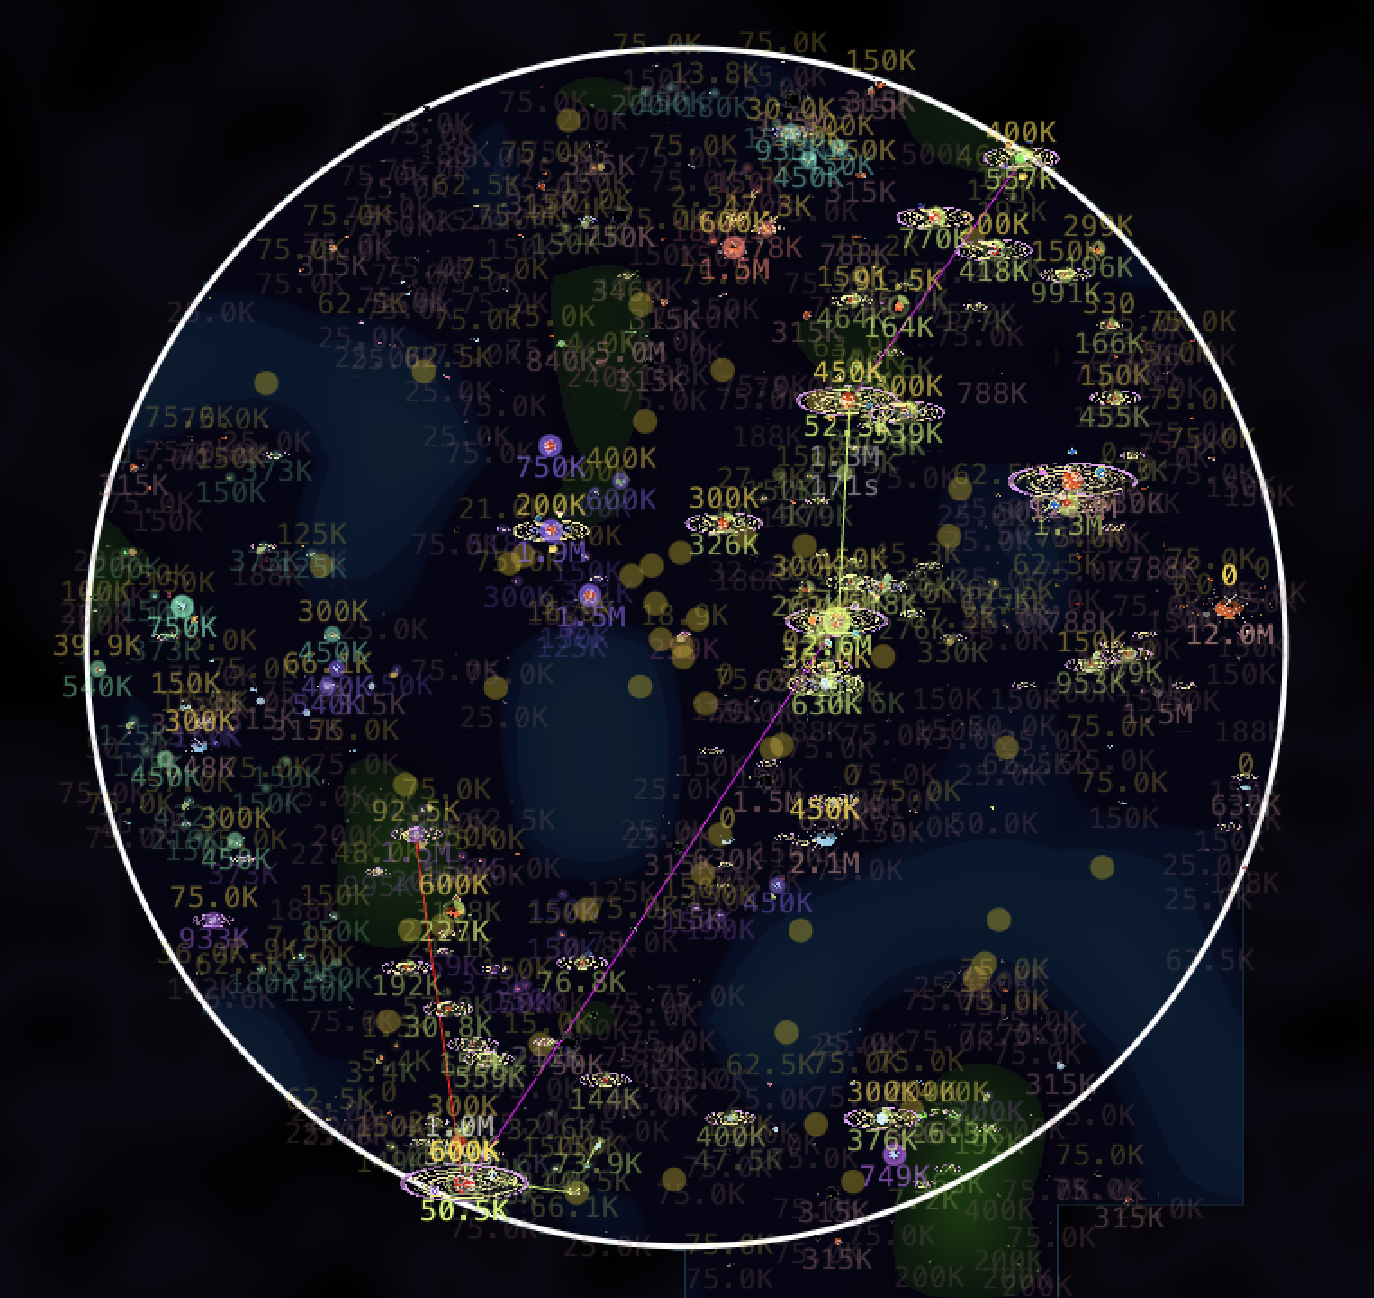 A Dark Forest universe with full map.